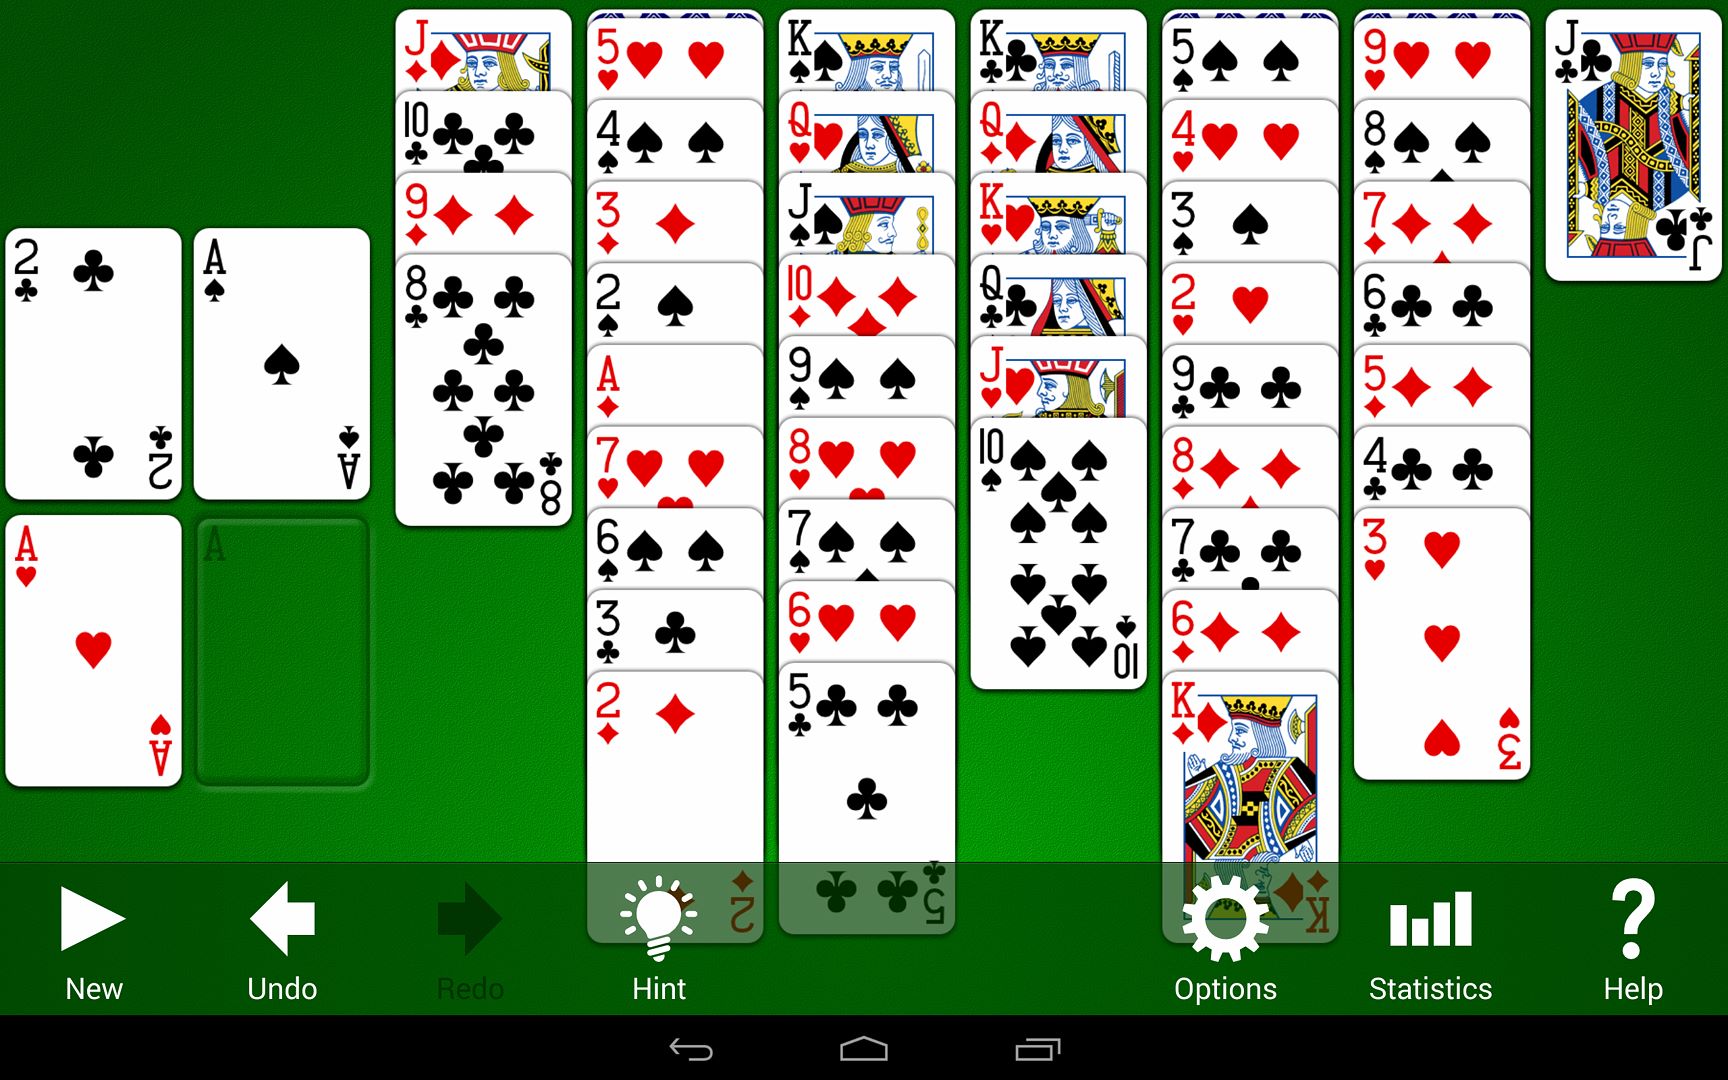 The Ultimate Solitaire Collection by Odesys for your mobile phone or tablet